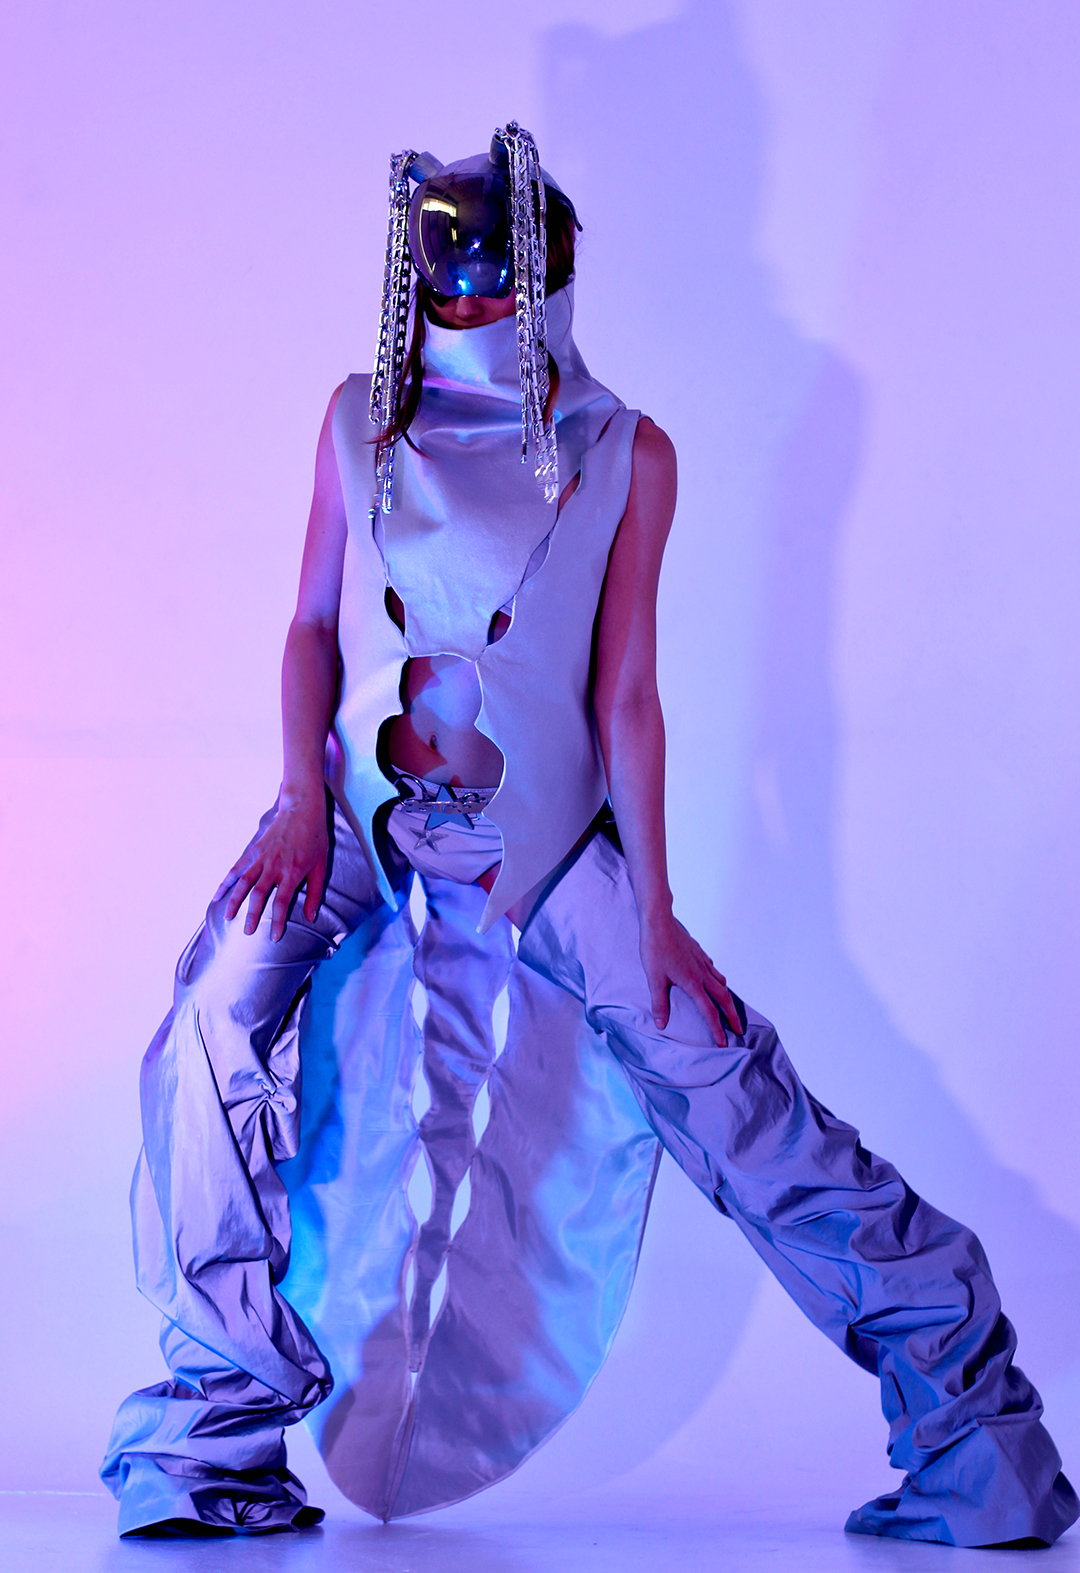 With purple hue lights, Sonja wears the main look of this collection; The Astral suit! With metallic fabrics, this look is reflective and shines when it hits the lights. Topped off with the 3D-printed Astral helmet with chain ponytails!